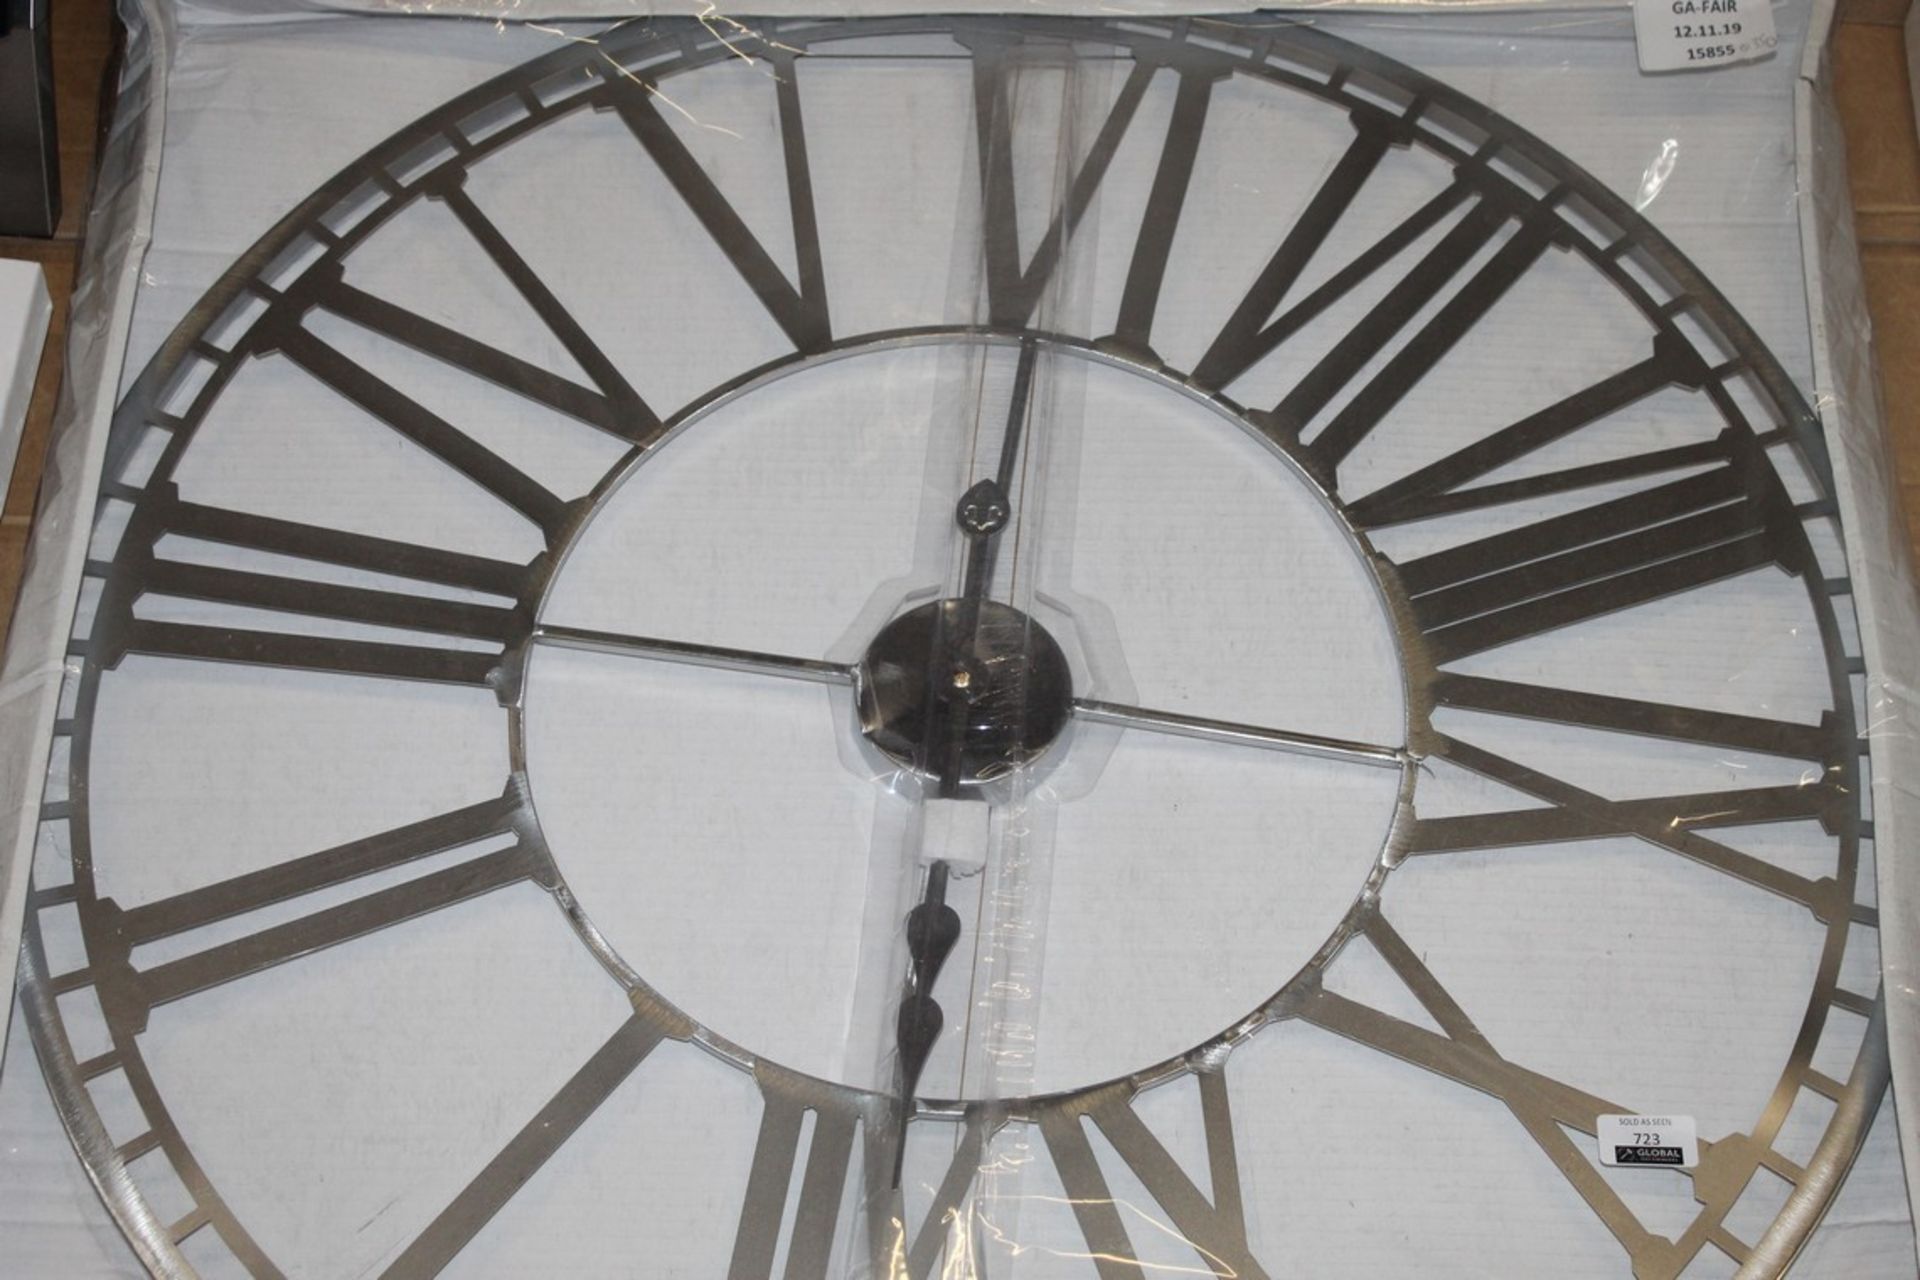 Round Metal Designer Roman Numeral Wall Clock RRP £135 (15855) (Public Viewing and Appraisals